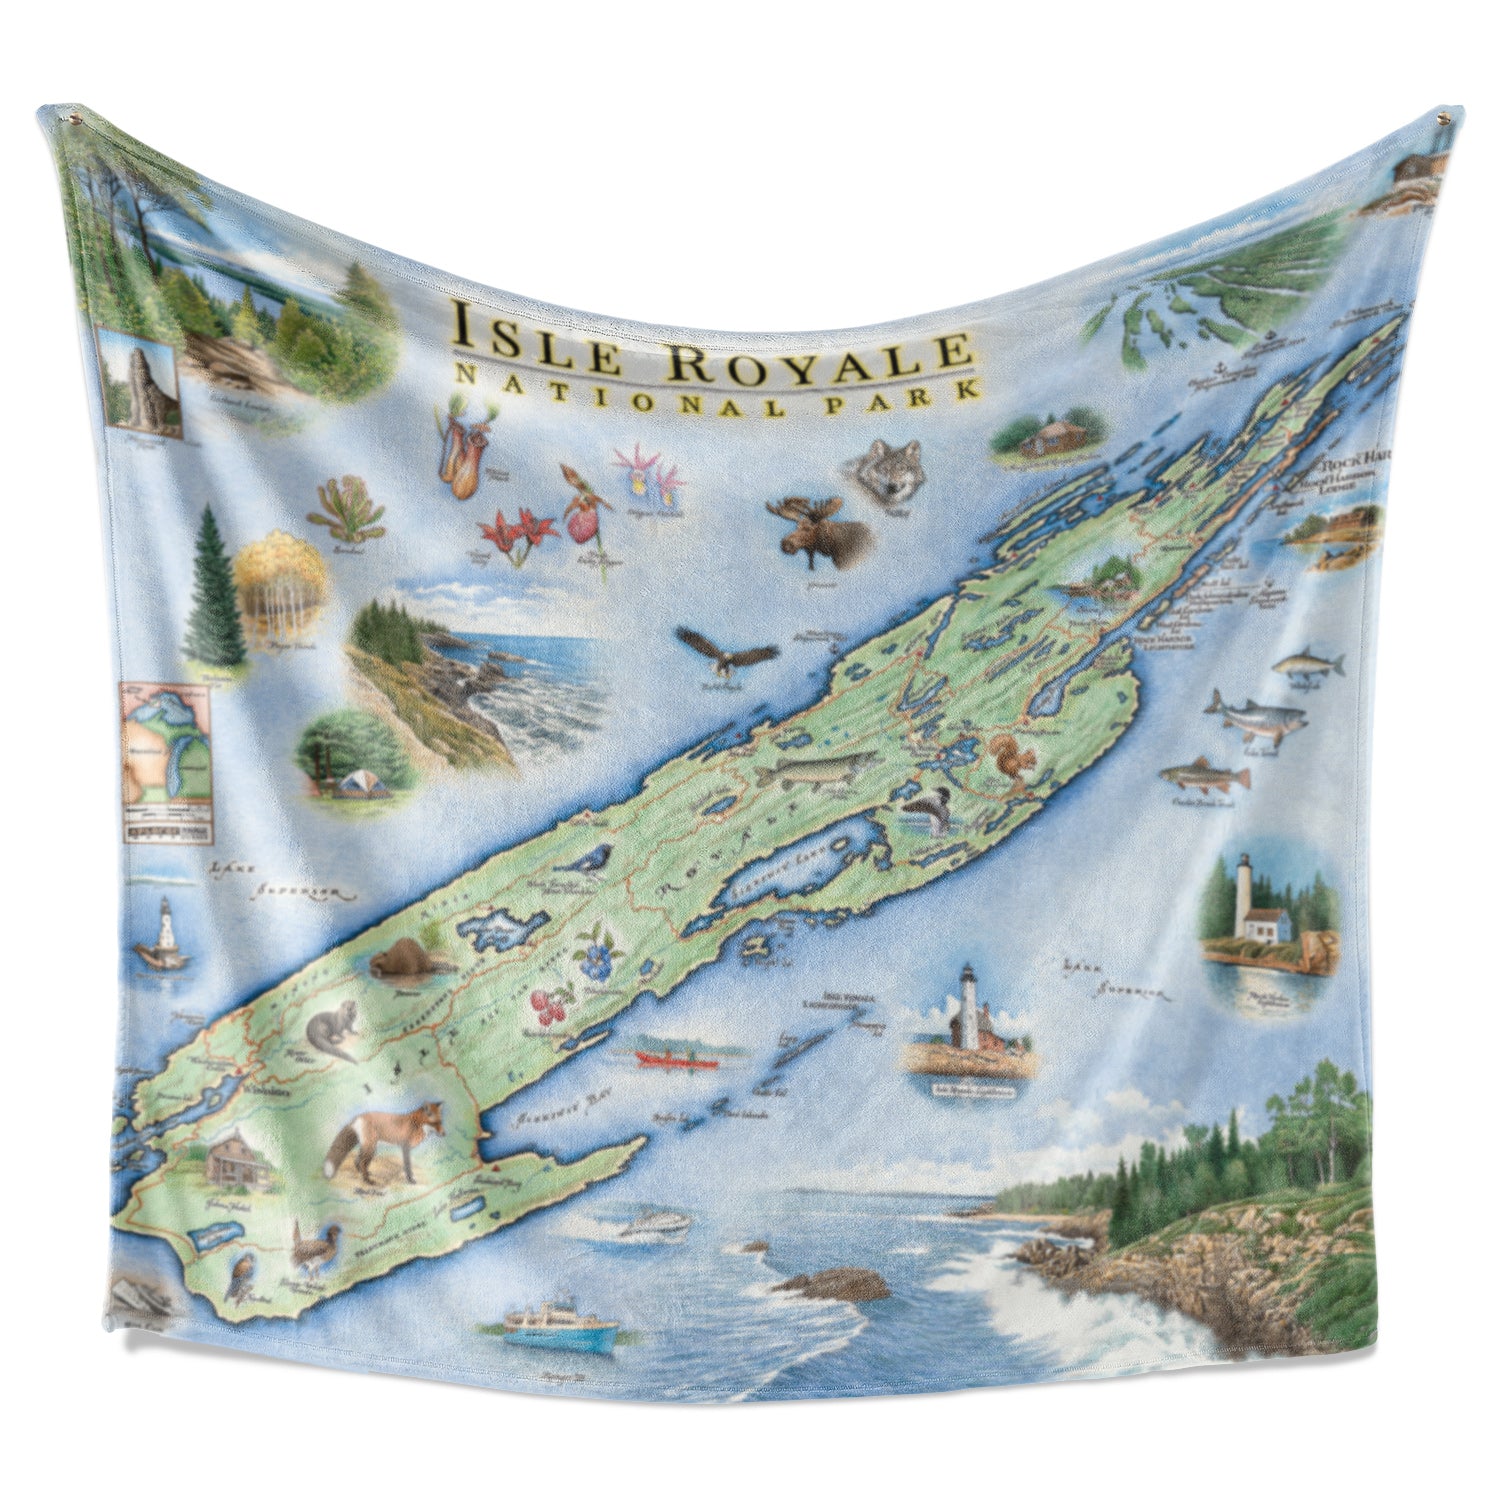 Hanging blanket with a map of Isle Royale National Park on it. Hand-drawn artwork. Full-color map. Blanket measures 58